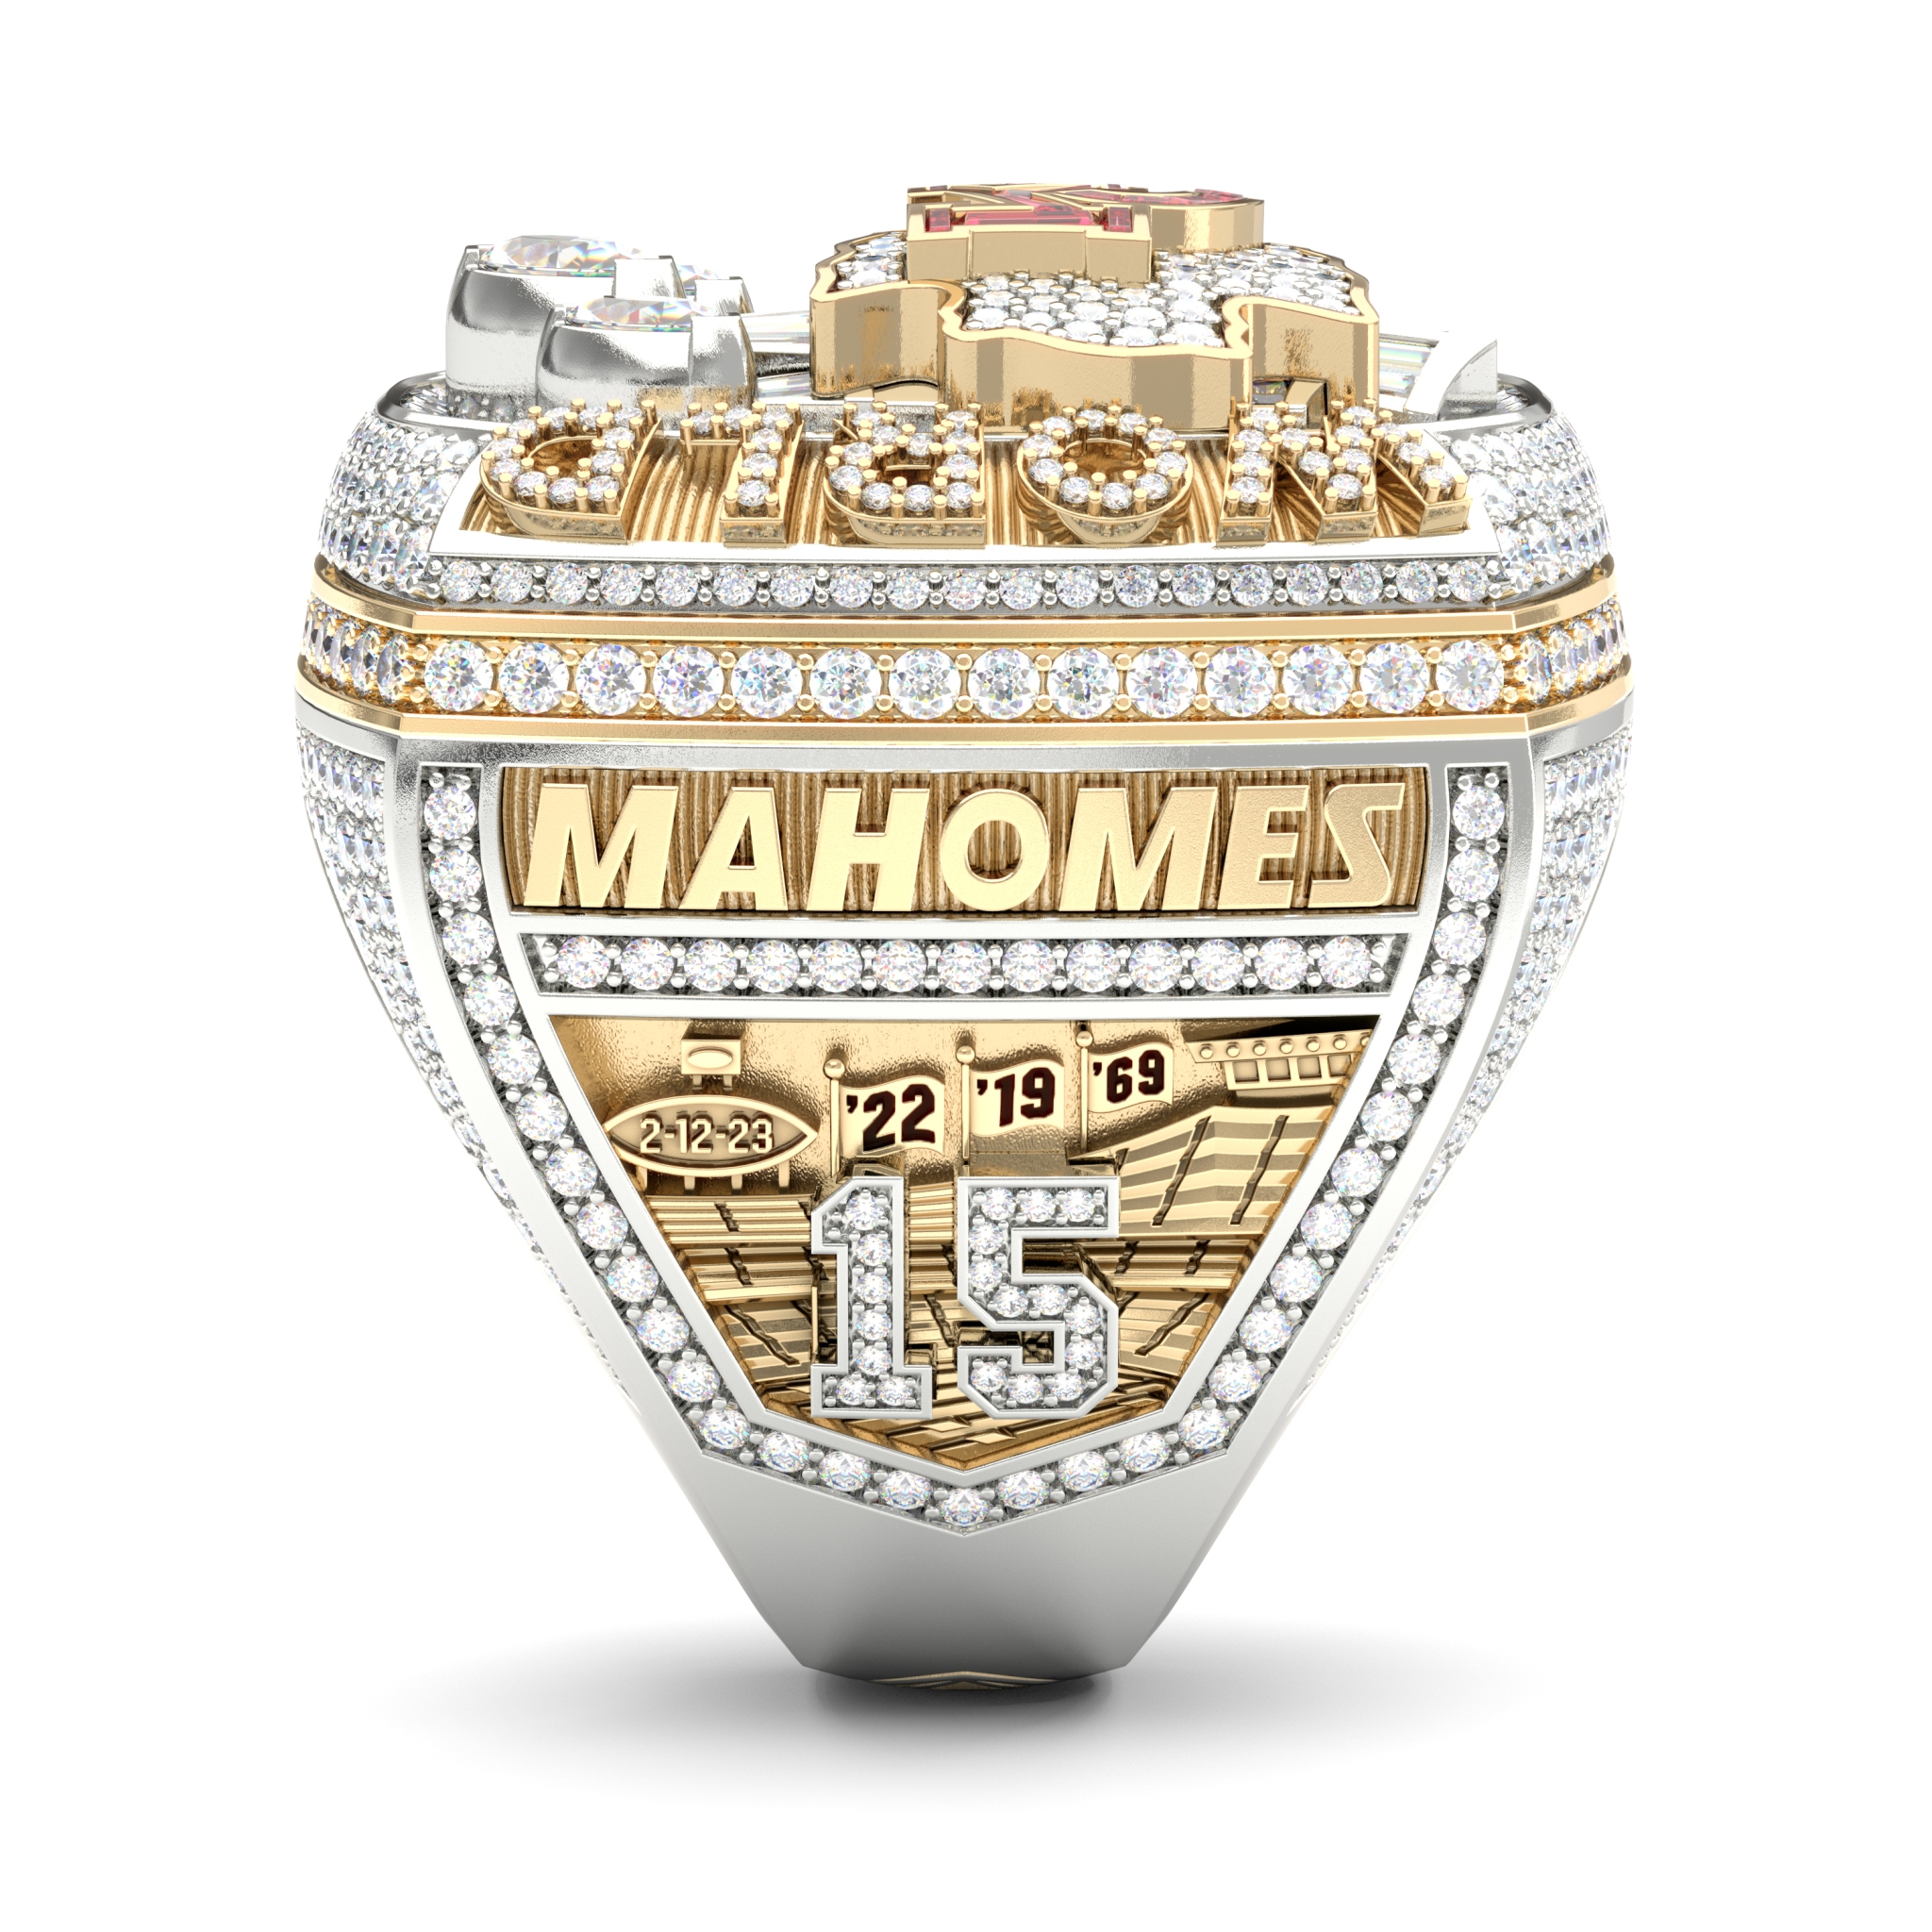 When will players receive the 2023 Super Bowl championship rings